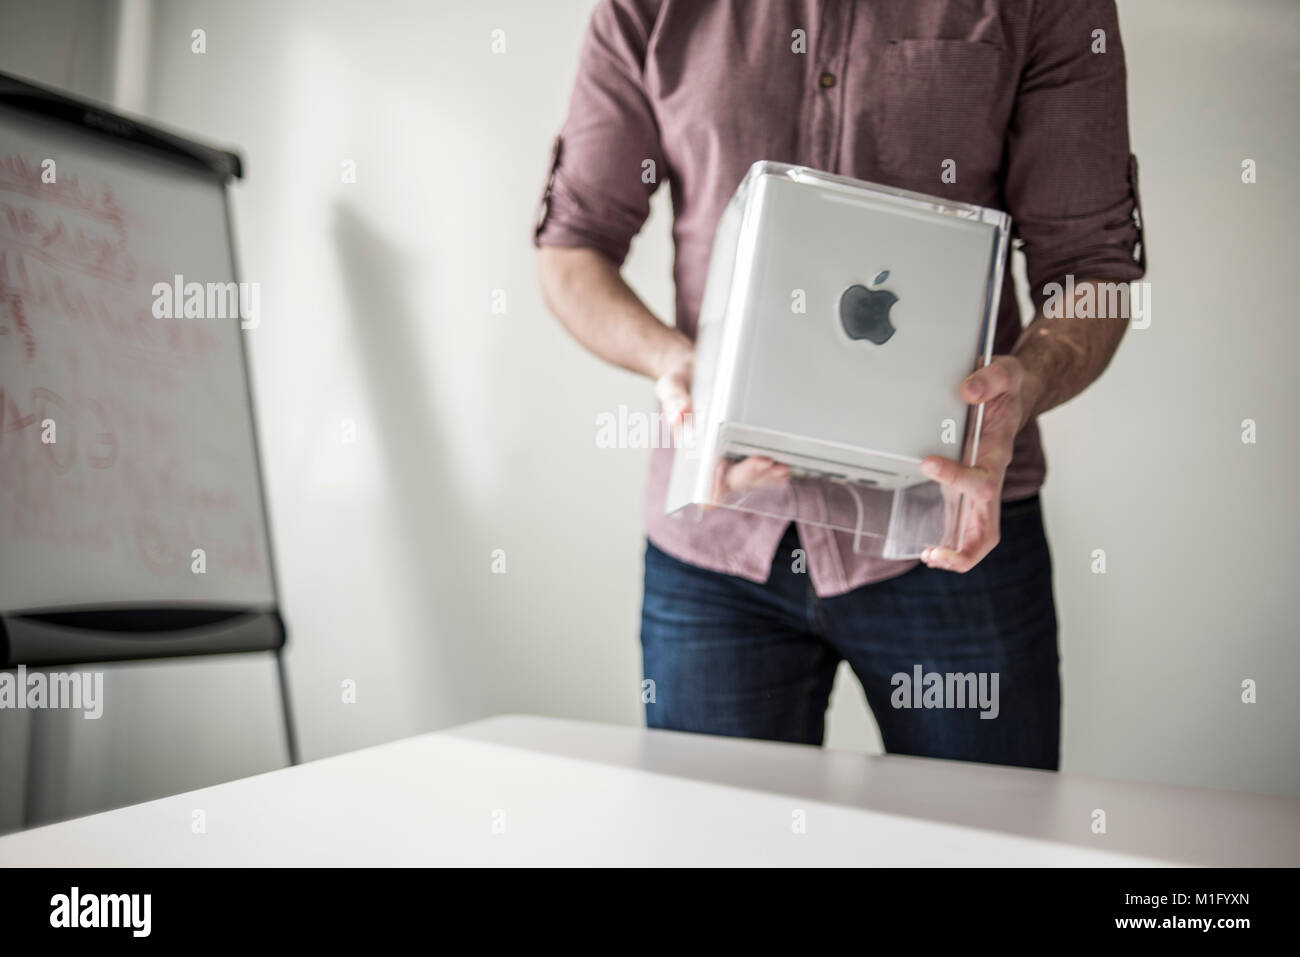 A member of staff shows Power Mac G4 Cube, release date July 2000, at MacPaw's Ukrainian Apple Museum in Kiev, Ukraine on January 26, 2017. Ukrainian developer MacPaw has opened Apple hardware museum at the company’s office in Kiev. The collection has more than 70 original Macintosh models dated from 1981 to 2017. Stock Photo